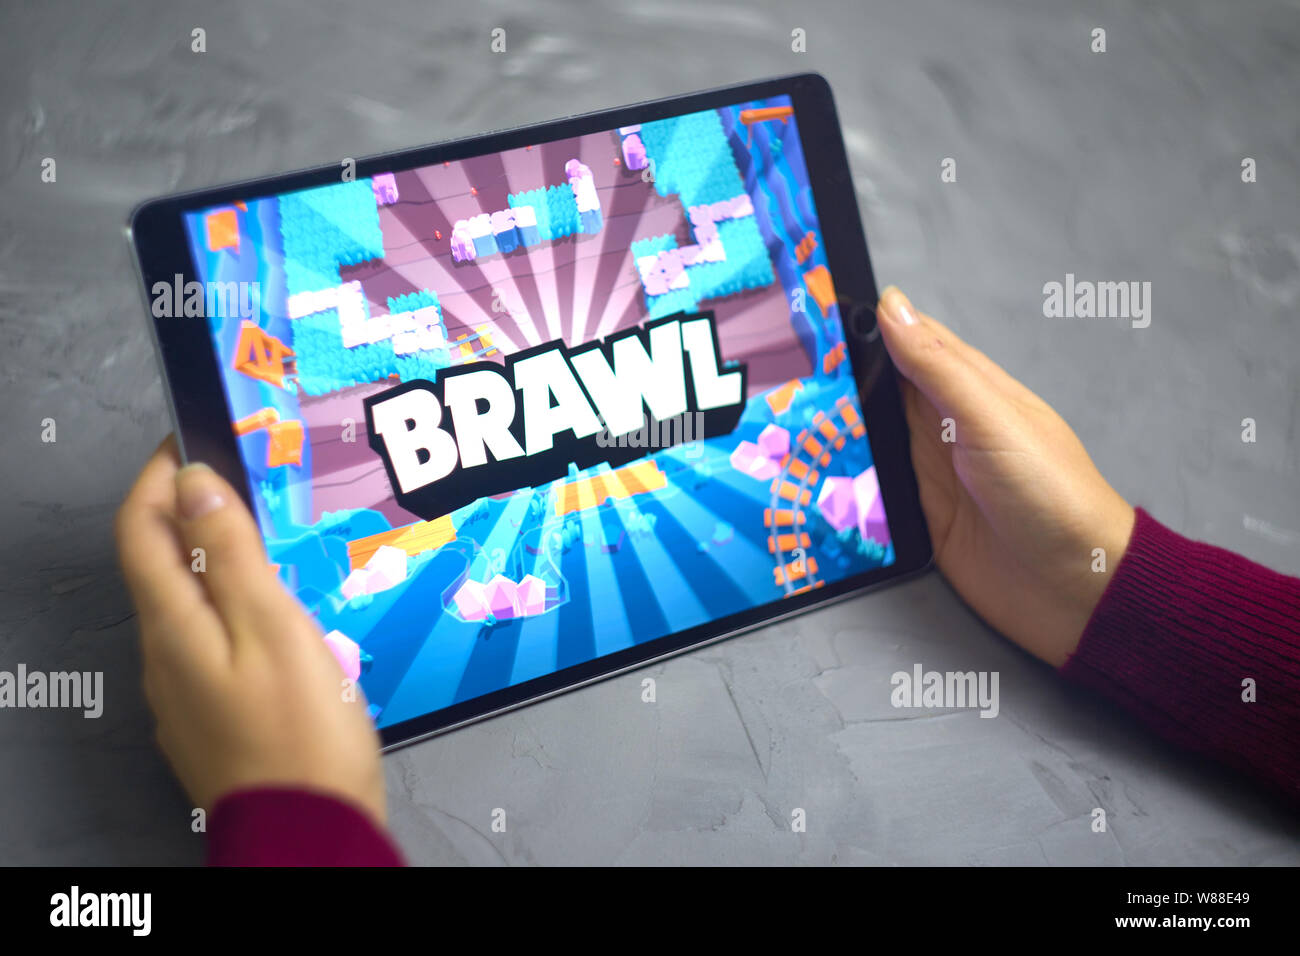 Supercell Game High Resolution Stock Photography And Images Alamy - brawl stars sur ios